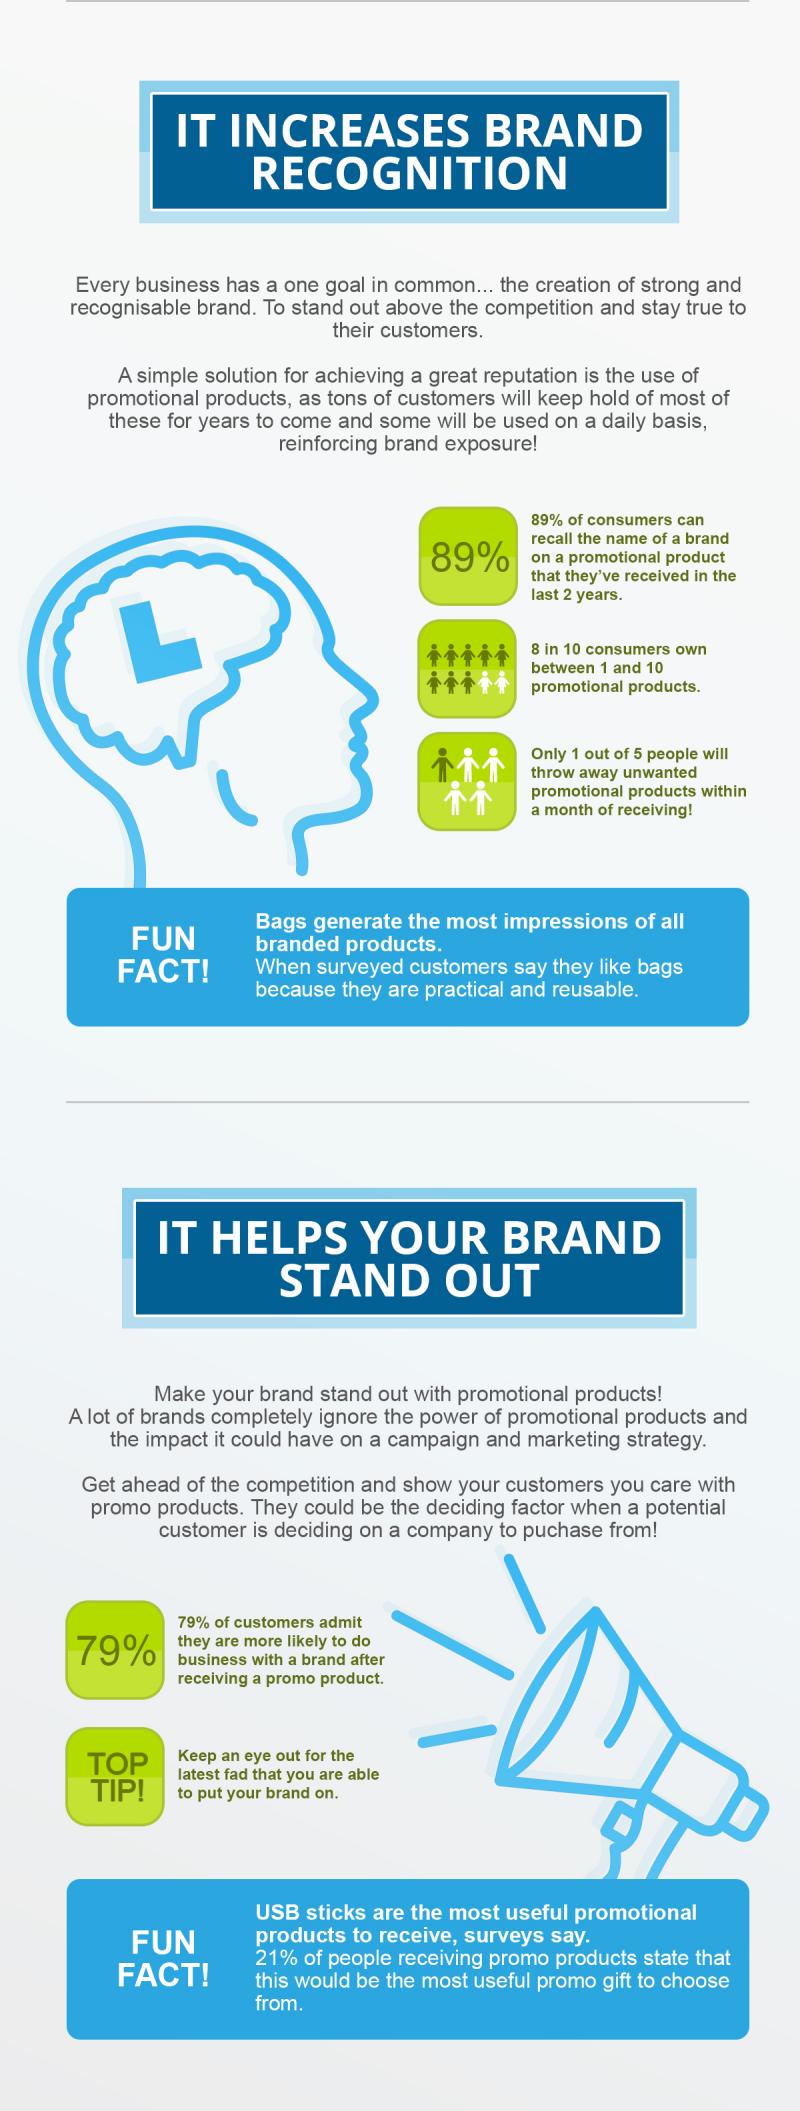 Promotional Products are Increases Brand Recognition and Helps Stand out